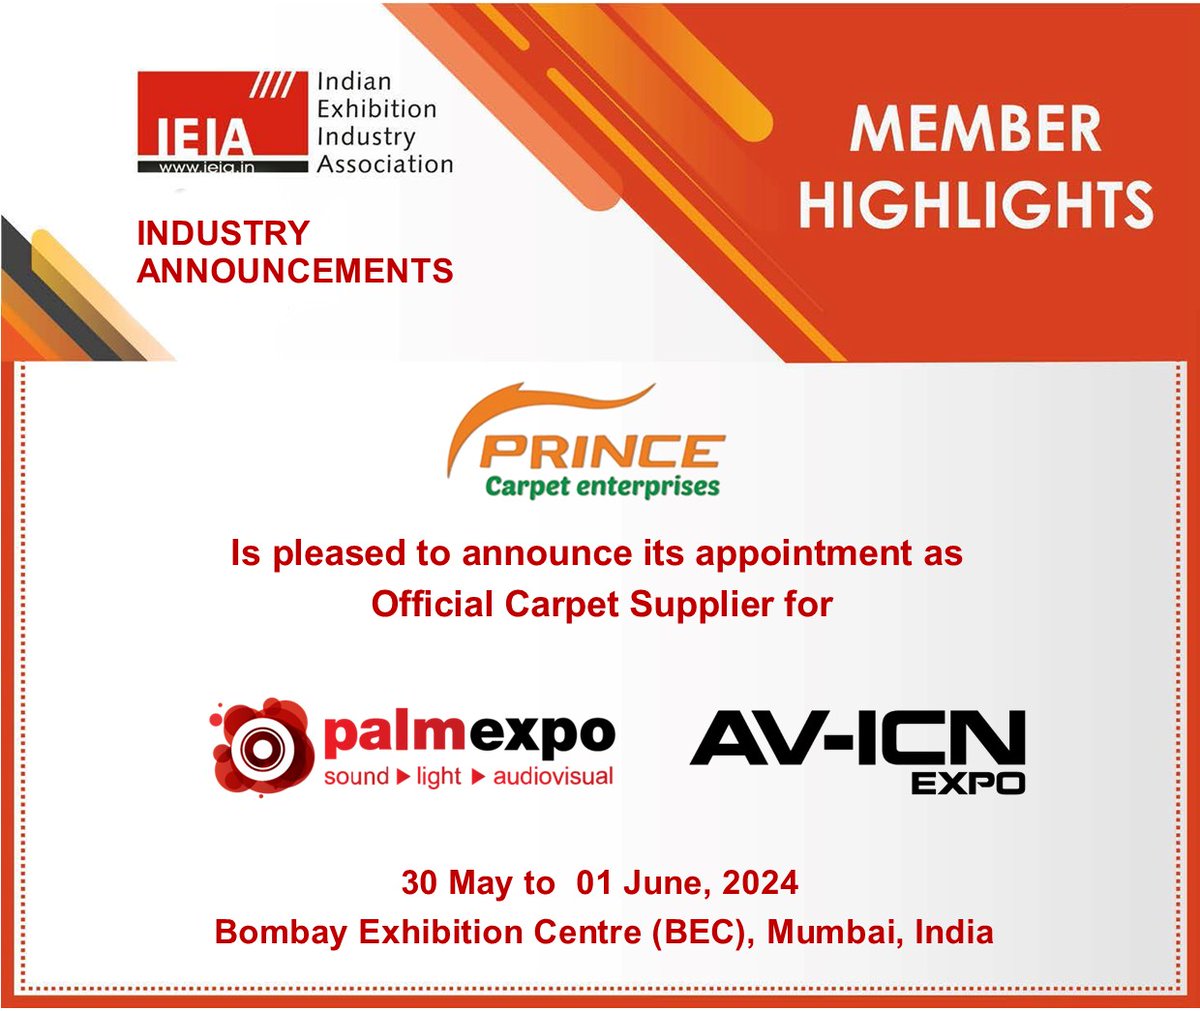 𝗜𝗡𝗗𝗨𝗦𝗧𝗥𝗬 𝗔𝗡𝗡𝗢𝗨𝗡𝗖𝗘𝗠𝗘𝗡𝗧- IEIA Member- Prince Carpet Enterprises has been appointed as official Carpet Supplier for PALM Expo - INDIA & AV ICN Expo 2024, to be held in Bombay Exhibition Centre, India.
For more details: princecarpet.in
#PrinceCarpet #IEIA